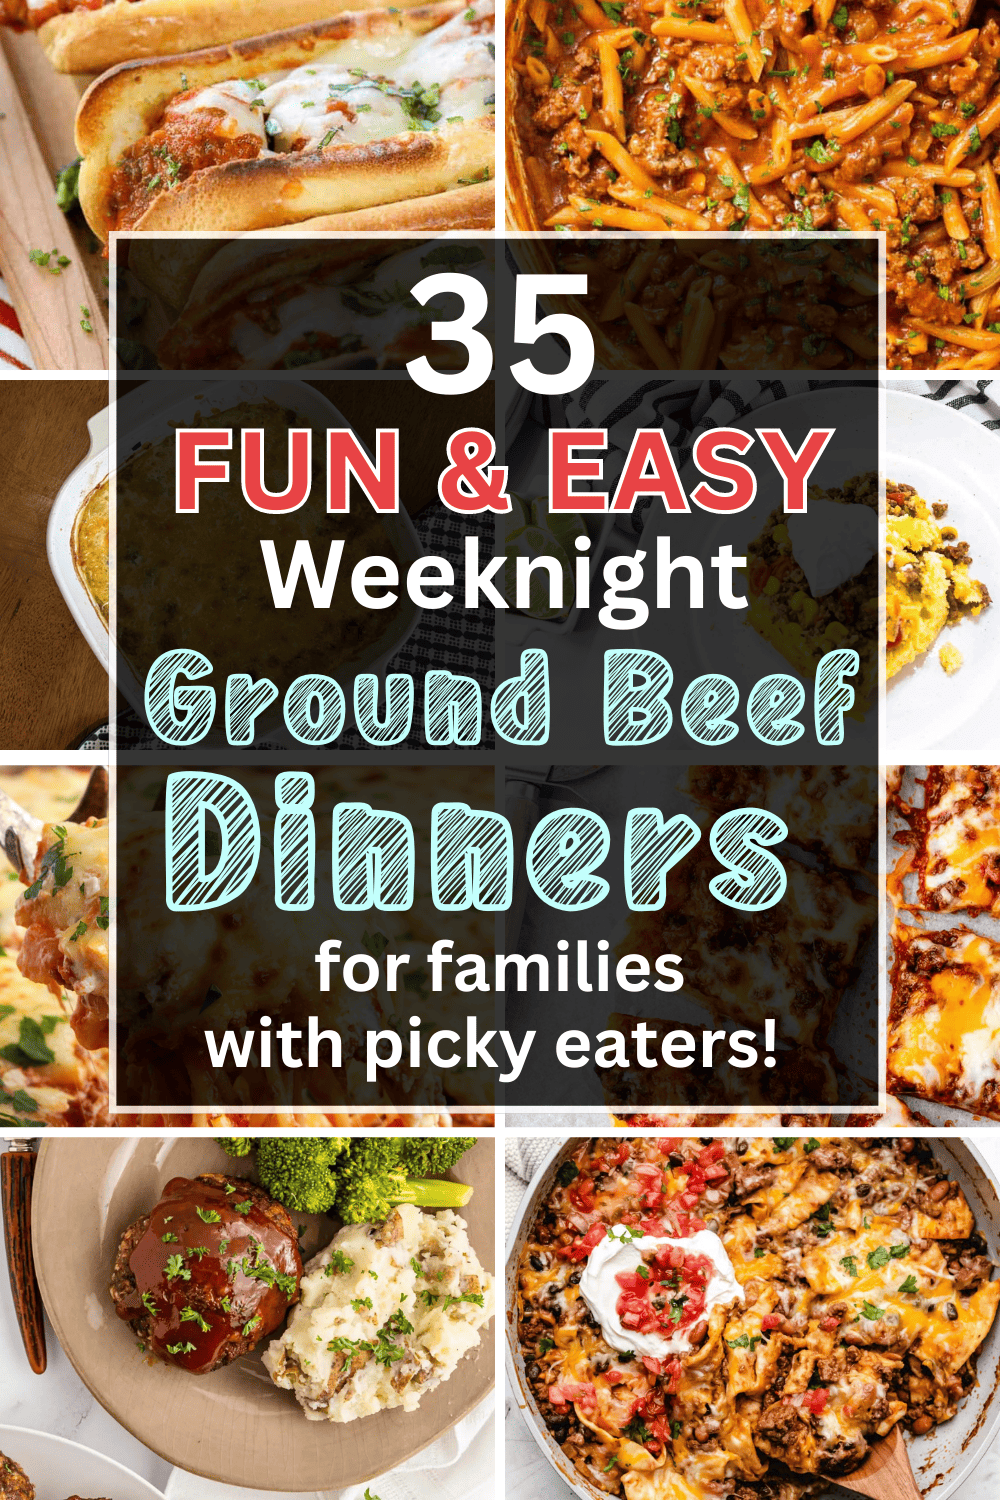 Easy weeknight dinners with ground beef! These are easy weeknight dinners ground beef, ground beef recipes easy healthy weeknight dinners, weeknight dinner easy families ground beef, fast easy dinner for family ground beef family quick meals, quick ground beef recipes for dinner easy, quick hamburger meat recipes ground beef, dinner ideas easy quick simple ground beef, ground beef dishes for dinner easy recipes, easy ground beef recipes for dinner main dishes, easy pasta dishes with ground beef.